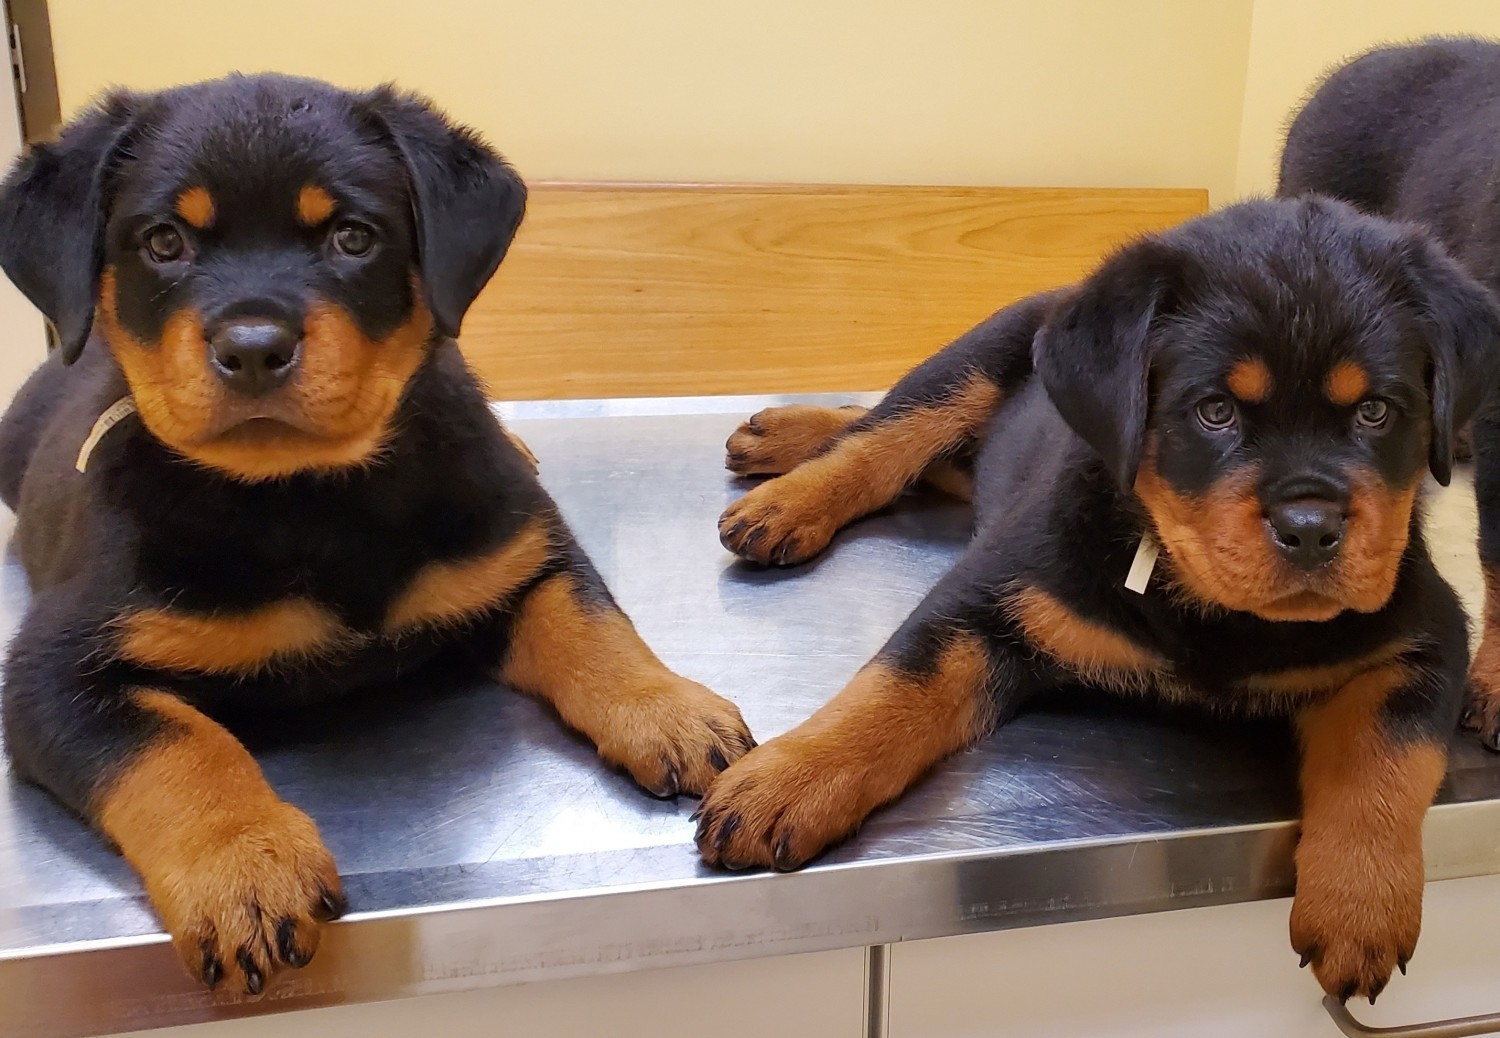 2. Craigslist Rottweiler Puppies for Sale Near Me - wide 6